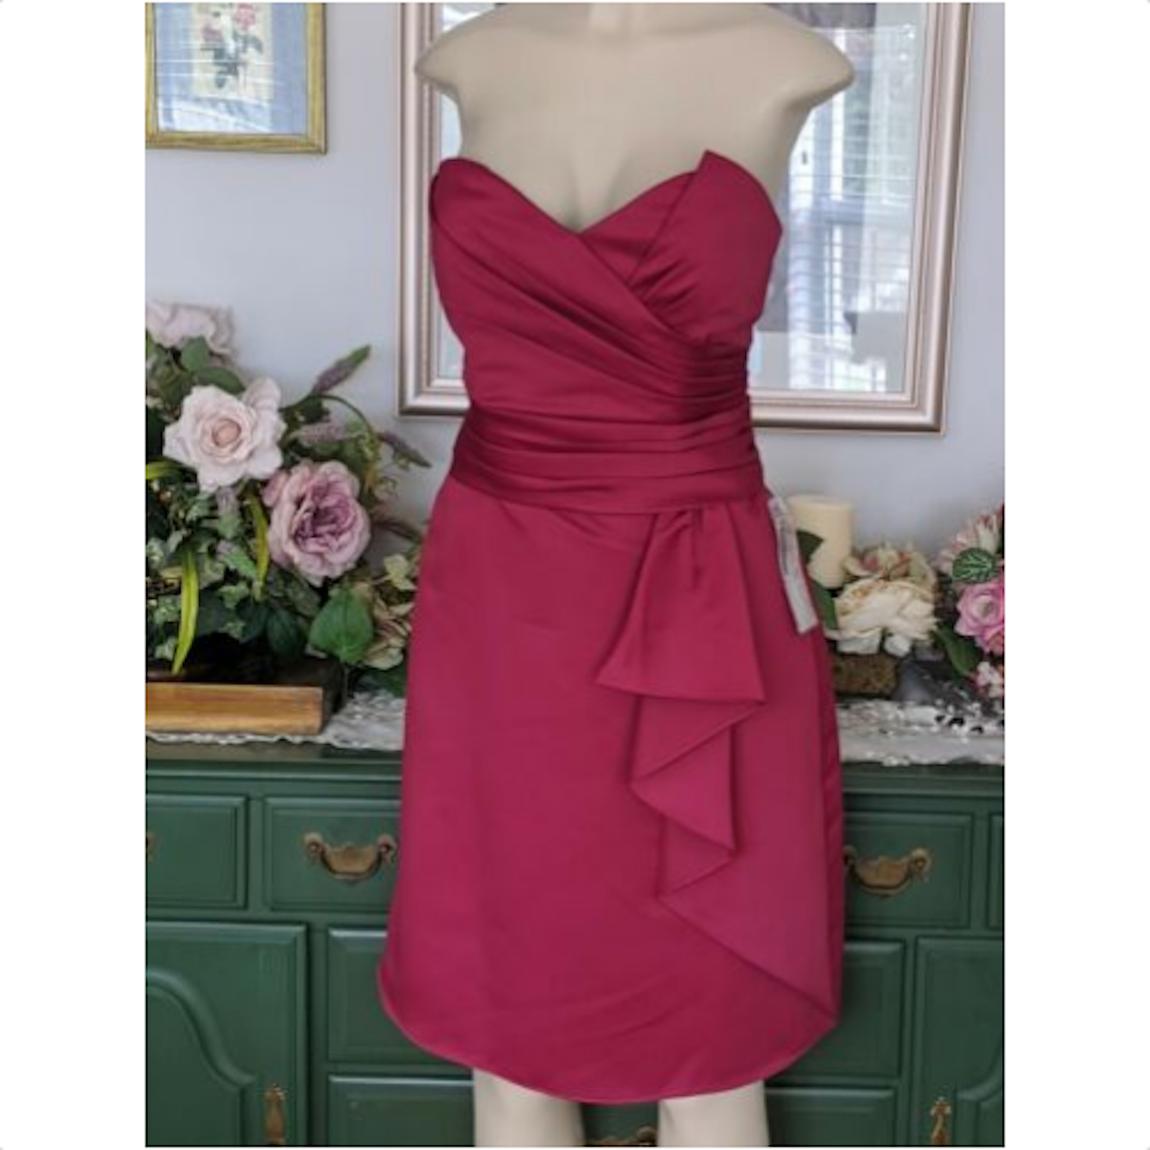 Eden Bridal Size 10 Bridesmaid Strapless Satin Red Cocktail Dress on Queenly